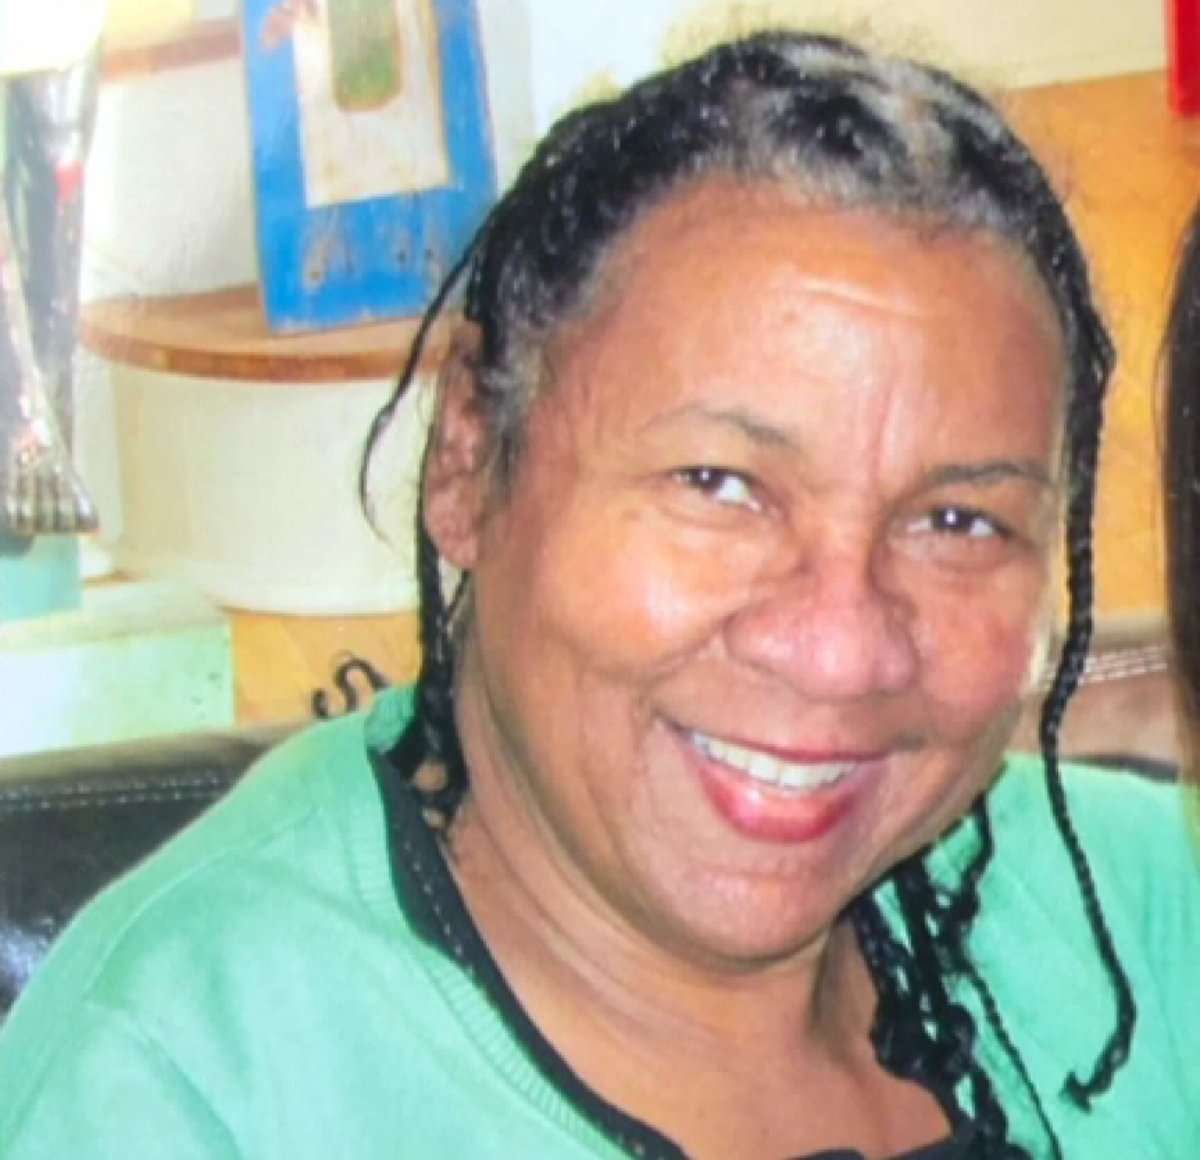 Watkins, late author known as bell hooks, is pictured in undated image